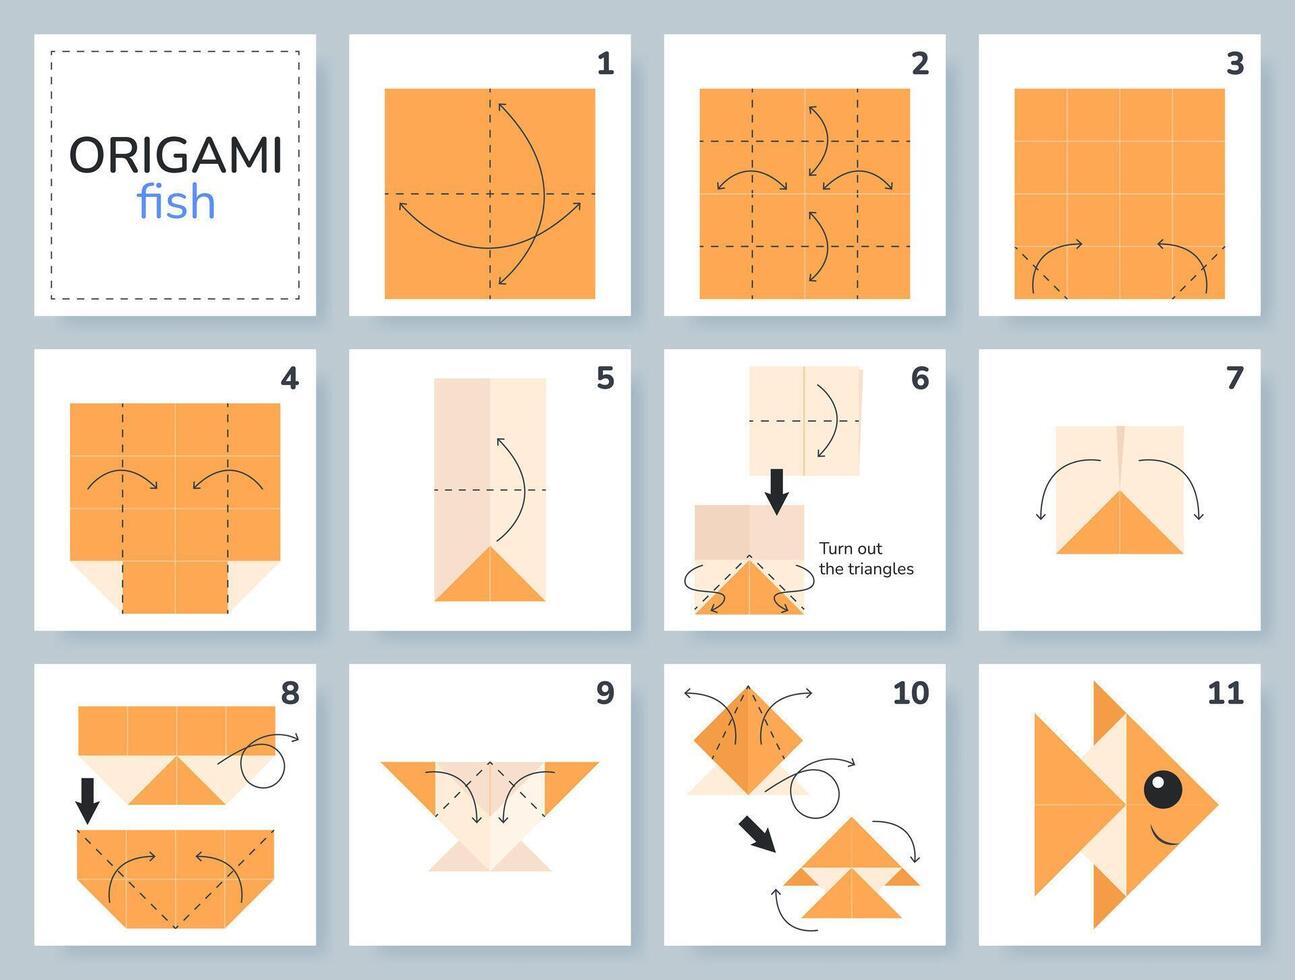 Fish origami scheme tutorial moving model. Origami for kids. Step by step how to make a cute origami aquarium fish. Vector illustration.